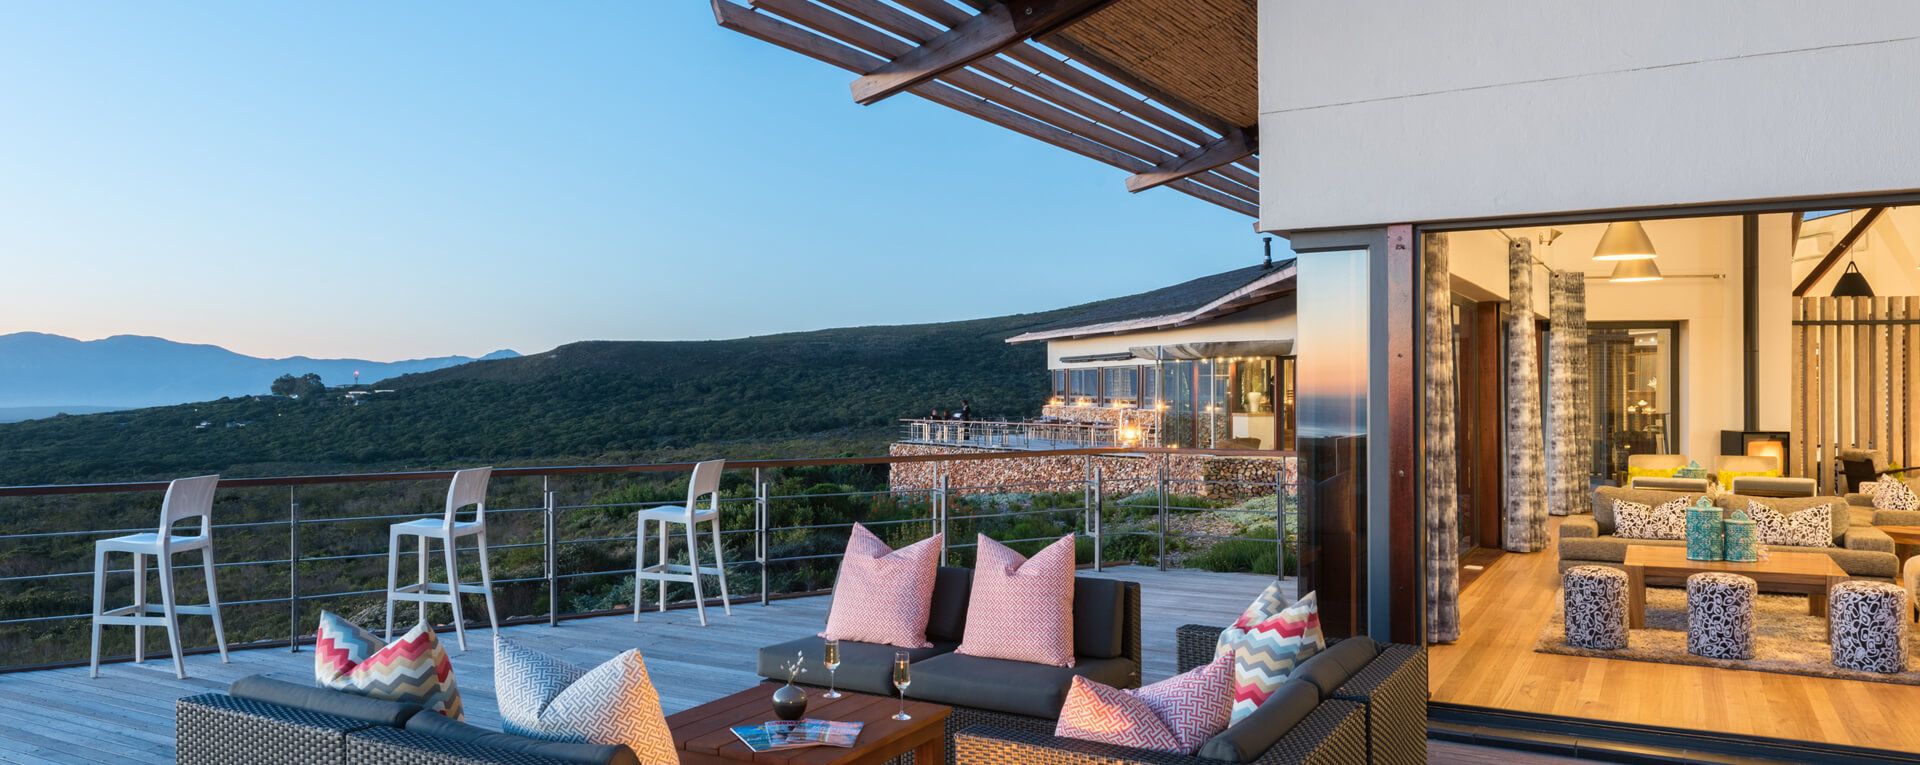 Grootbos Private Nature Reserve™